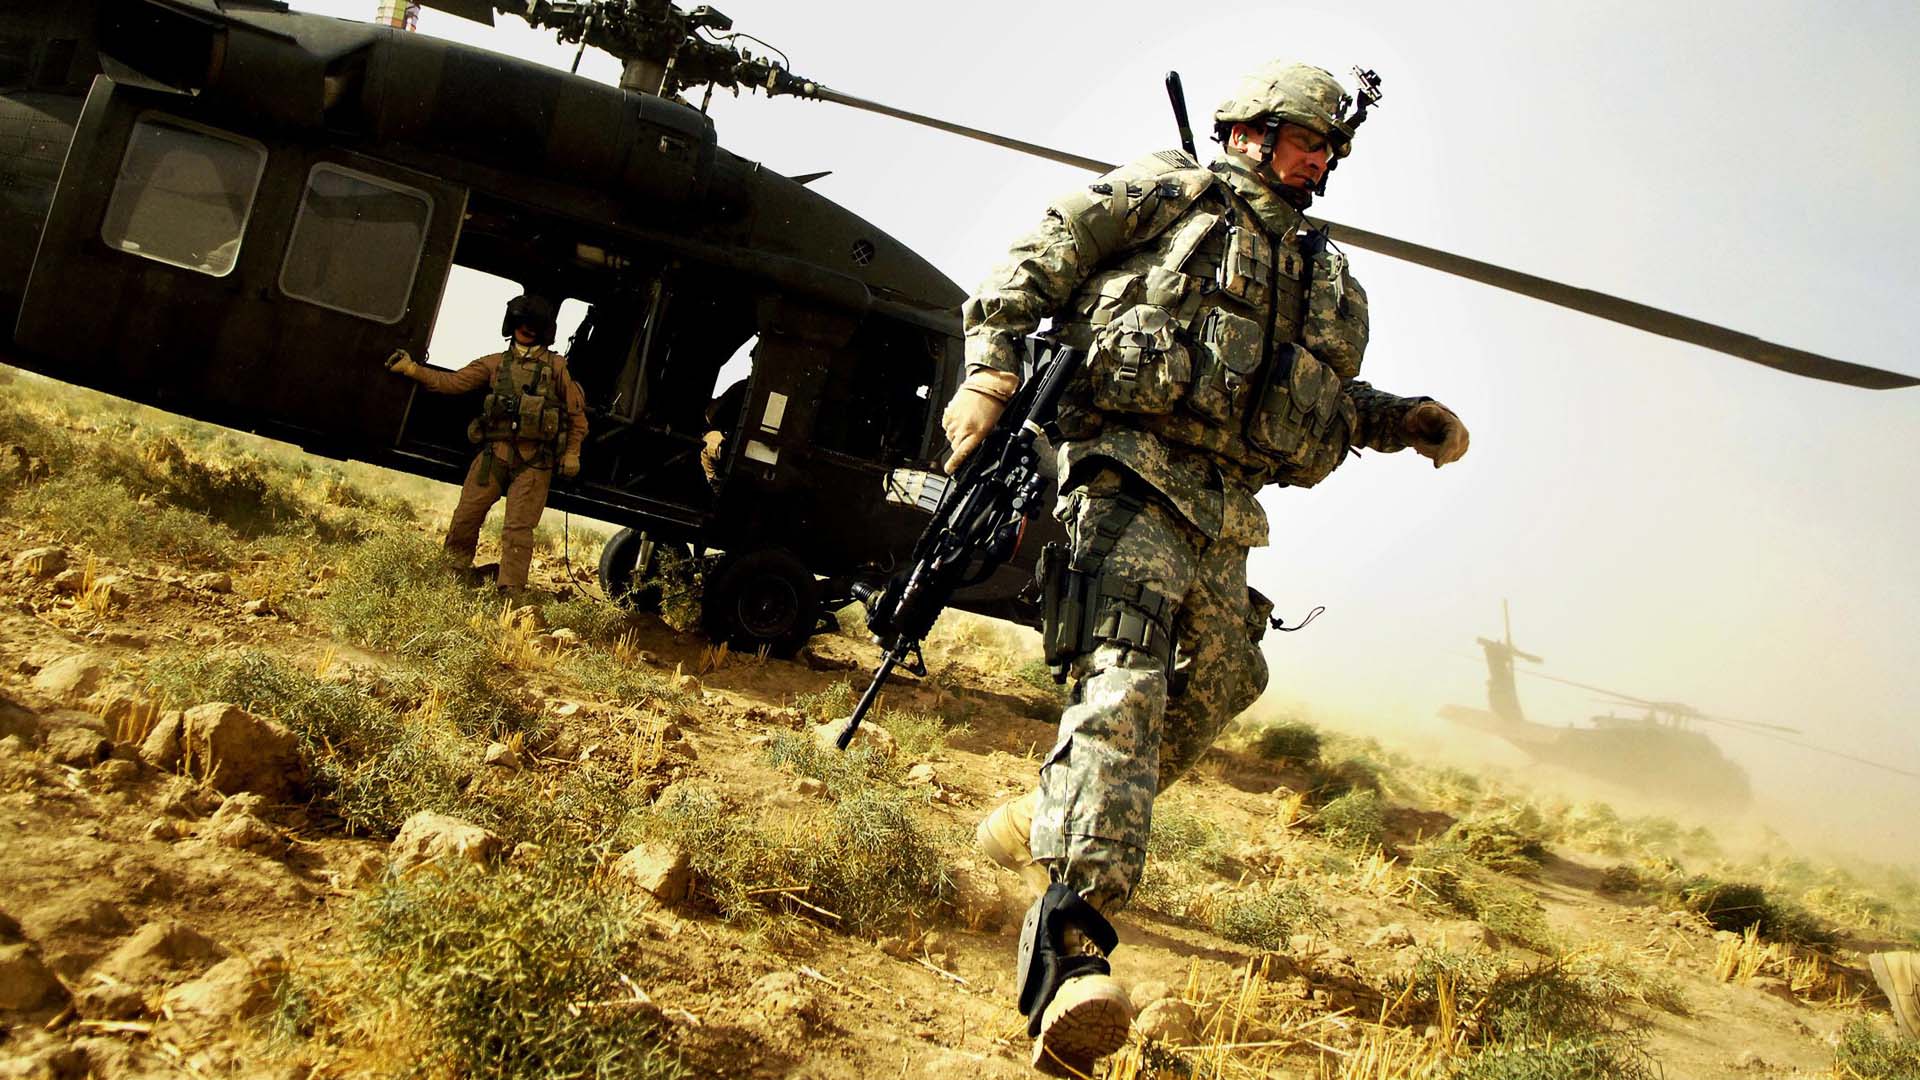 Us Army Soldier Wallpapers Full HD Daily Backgrounds in HD 1920x1080